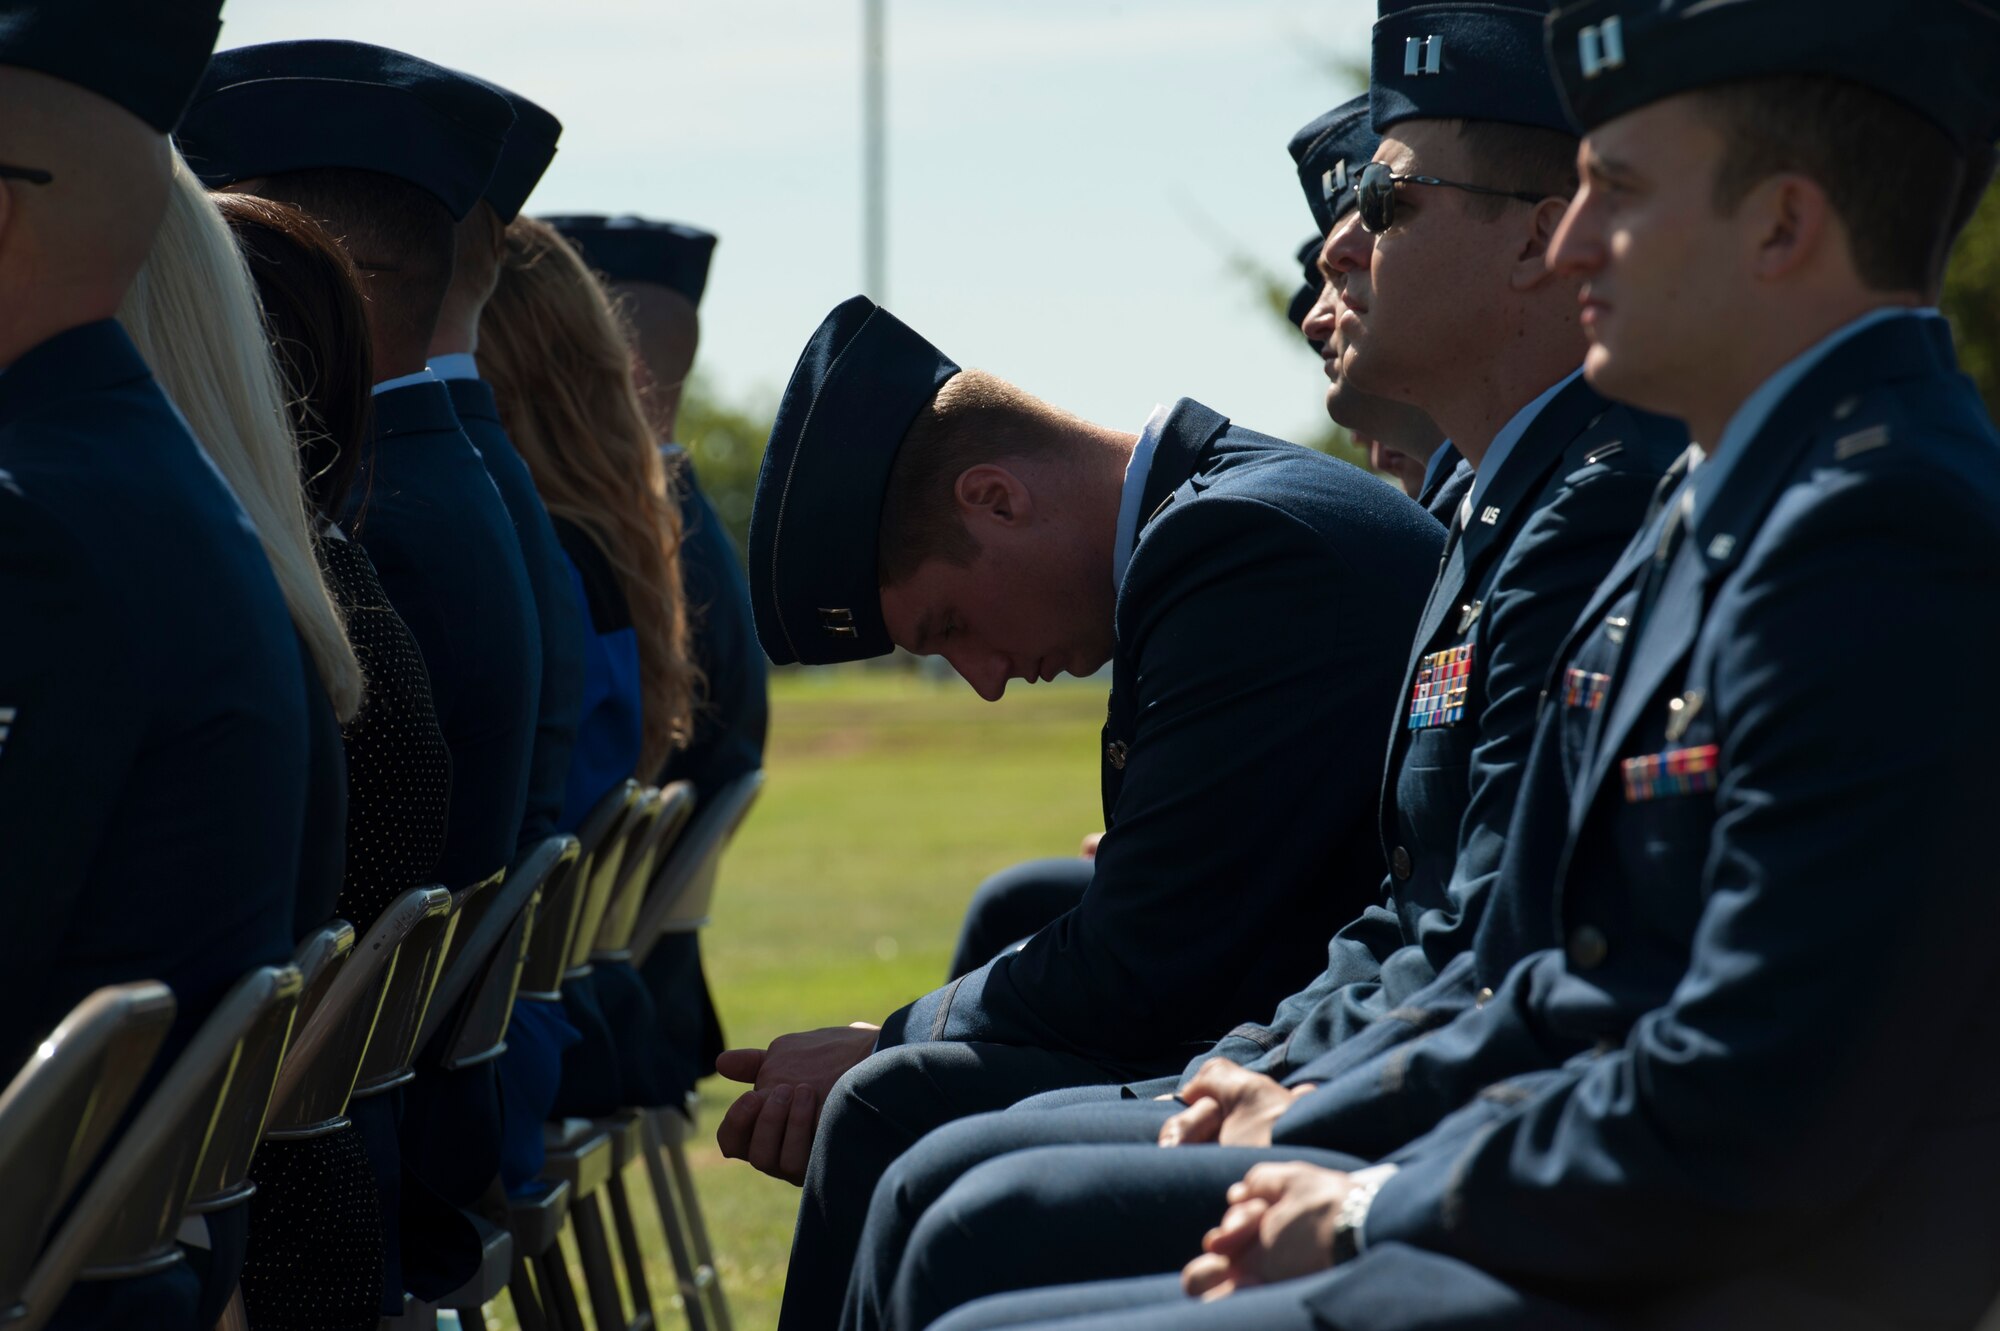 U.S. Air Force Airmen assigned to the 39th Airlift Squadron observe the TORQE 62 memorial ceremony at Dyess Air Force Base, Texas, Sept. 30, 2016. The 39th Airlift Squadron lost four of their Airmen after a C-130J Super Hercules crashed while deployed in Jalalabad, Afghanistan, Oct. 2, 2015. (U.S. Air Force photo by Airman 1st Class Rebecca Van Syoc)